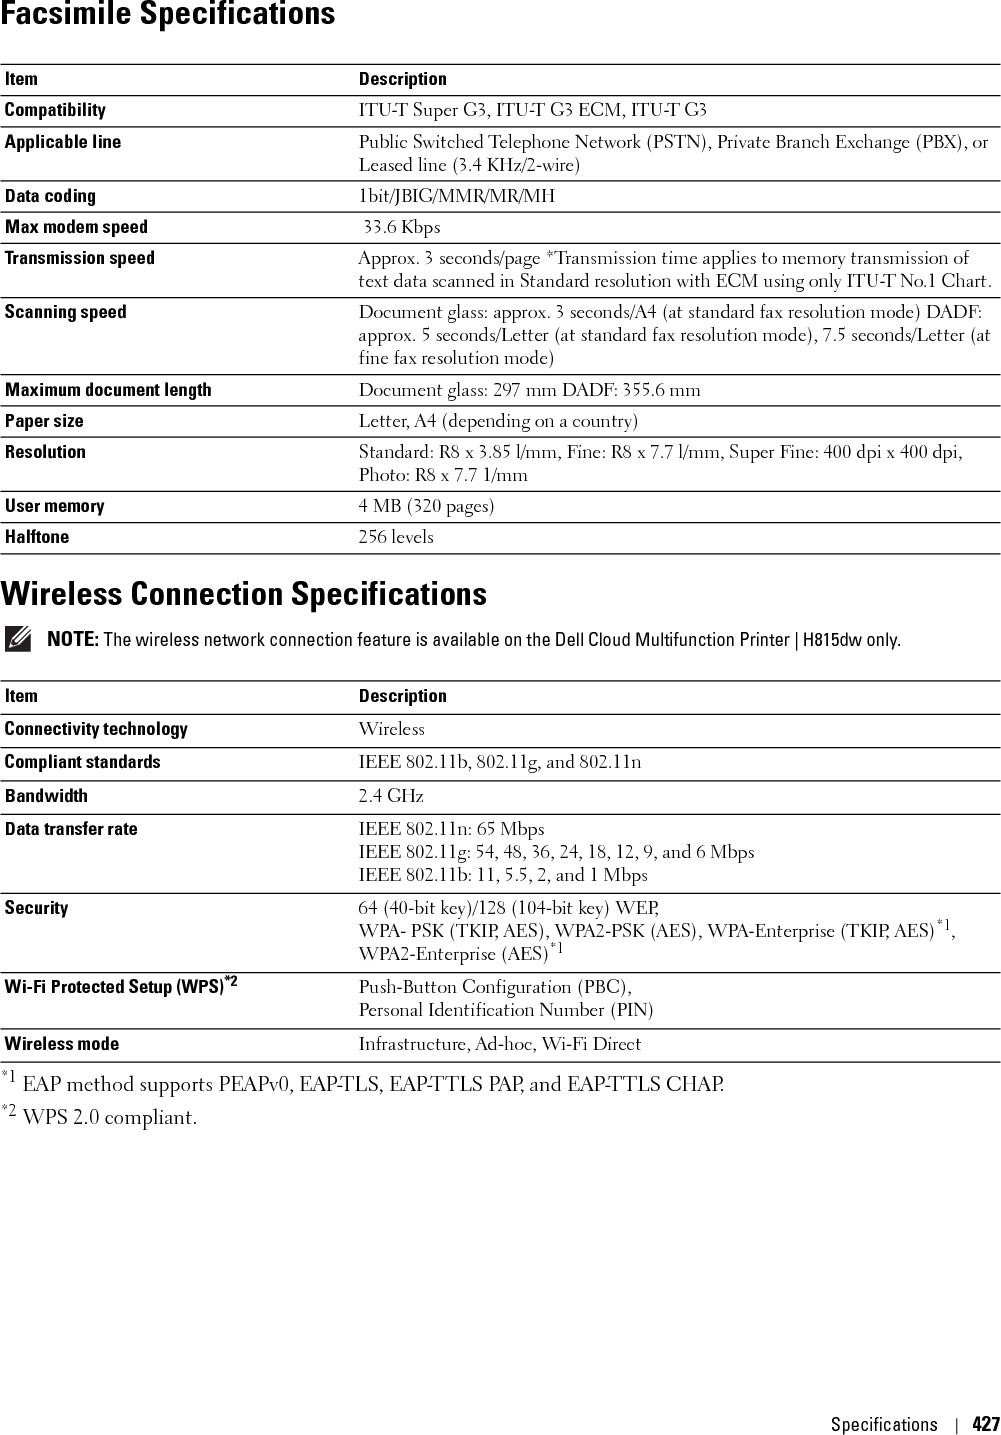 428Specifications